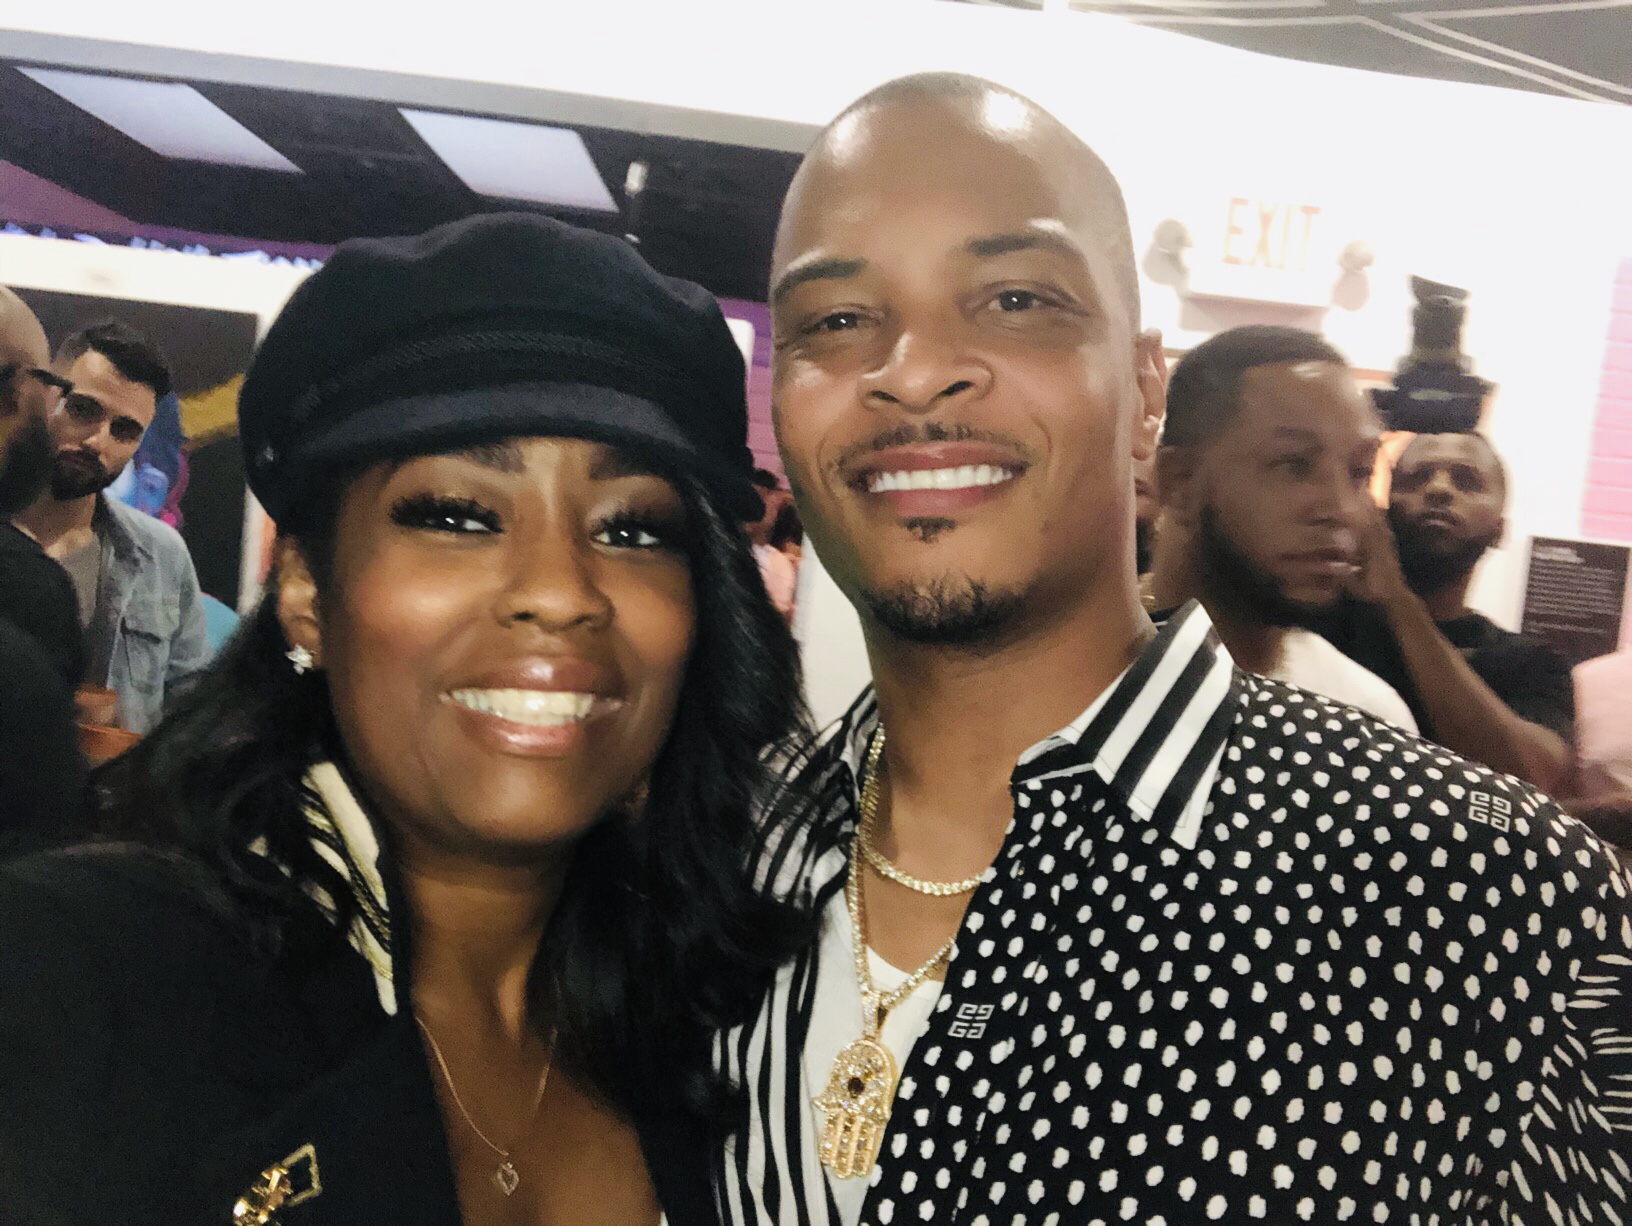 Rapper T.I.’s Private Album Listening Party At Trap Music Museum